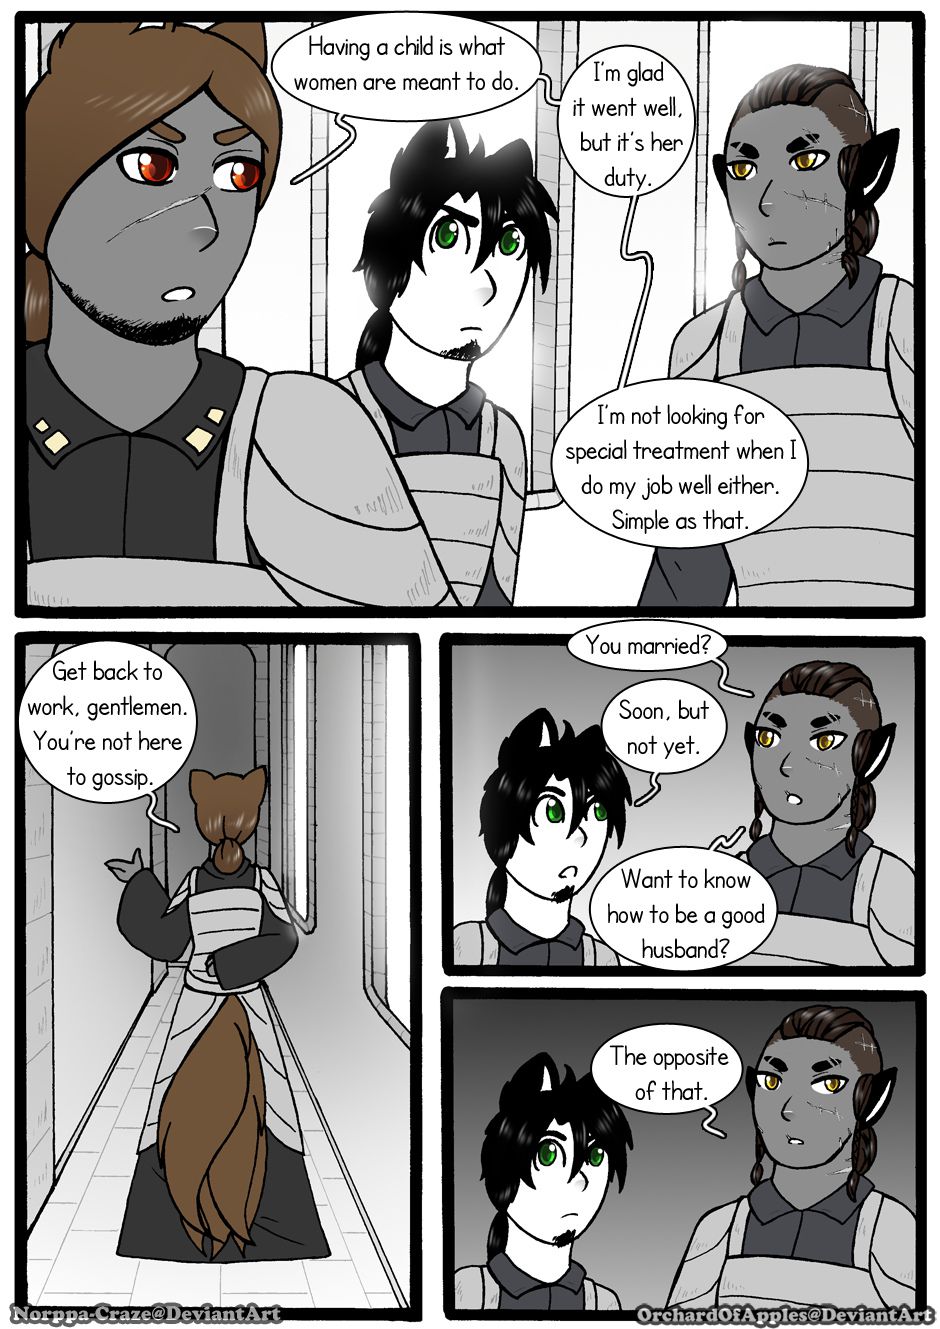 [Jeny-jen94] Between Kings and Queens [Ongoing] 298